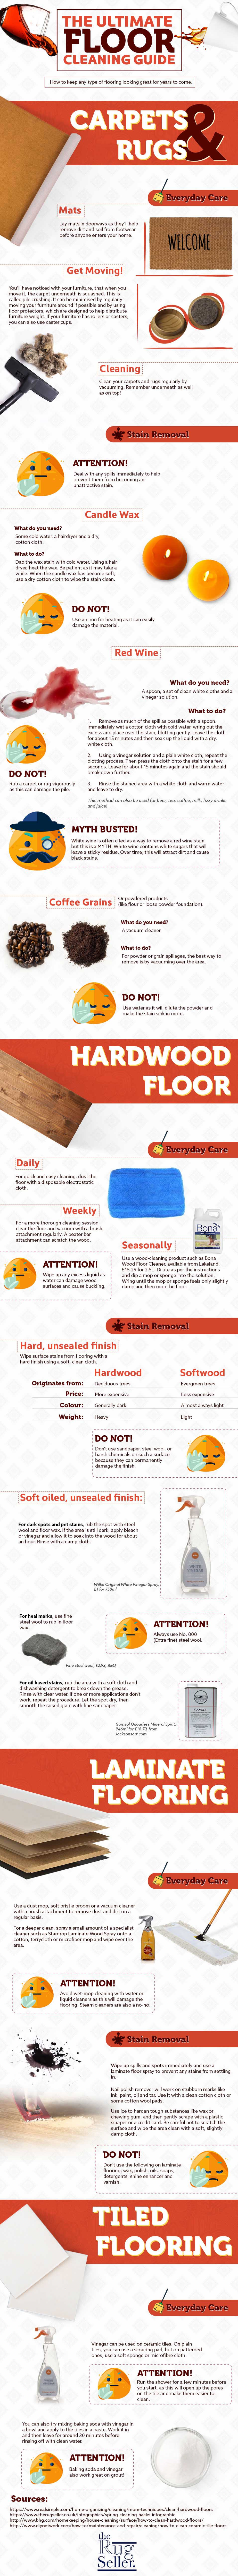 The Ultimate Floor Cleaning Guide